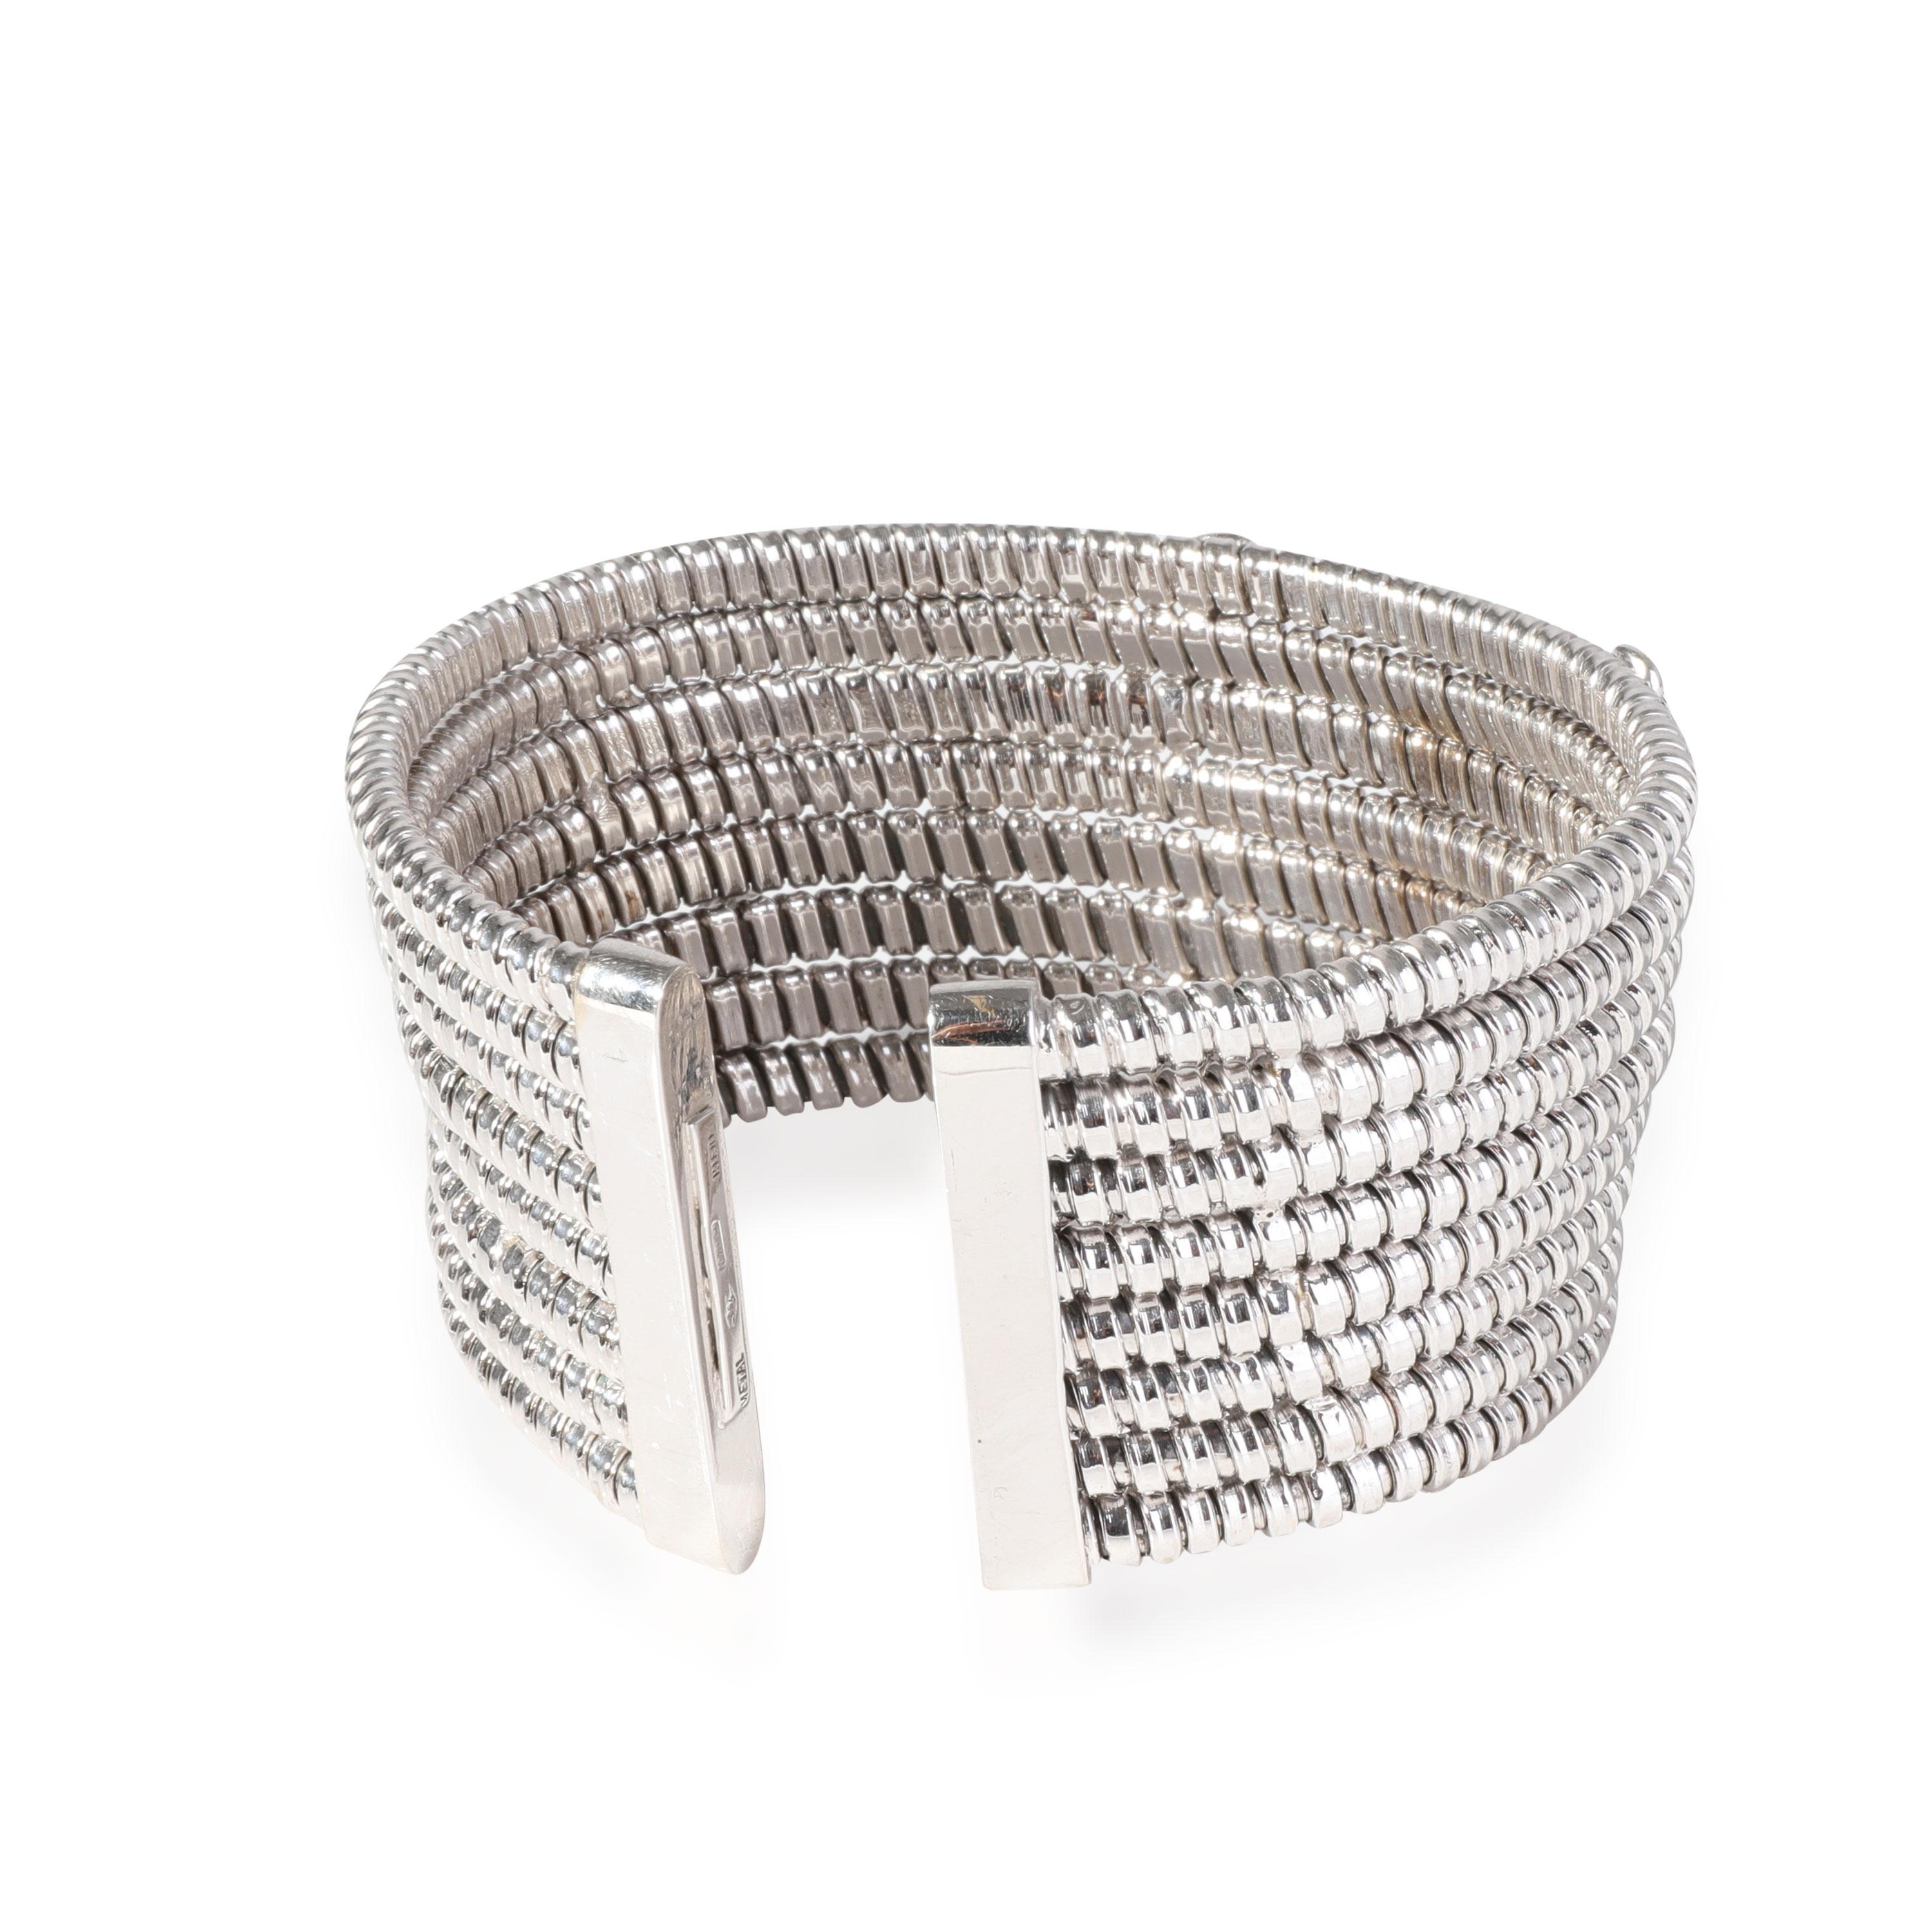 Pierez di Guiseppe Perez 8 Wrapped Coil in 18k White Gold 0.25 CTW

PRIMARY DETAILS
SKU: 118852
Listing Title: Pierez di Guiseppe Perez 8 Wrapped Coil in 18k White Gold 0.25 CTW
Condition Description: Retails for 11000 USD. In excellent condition